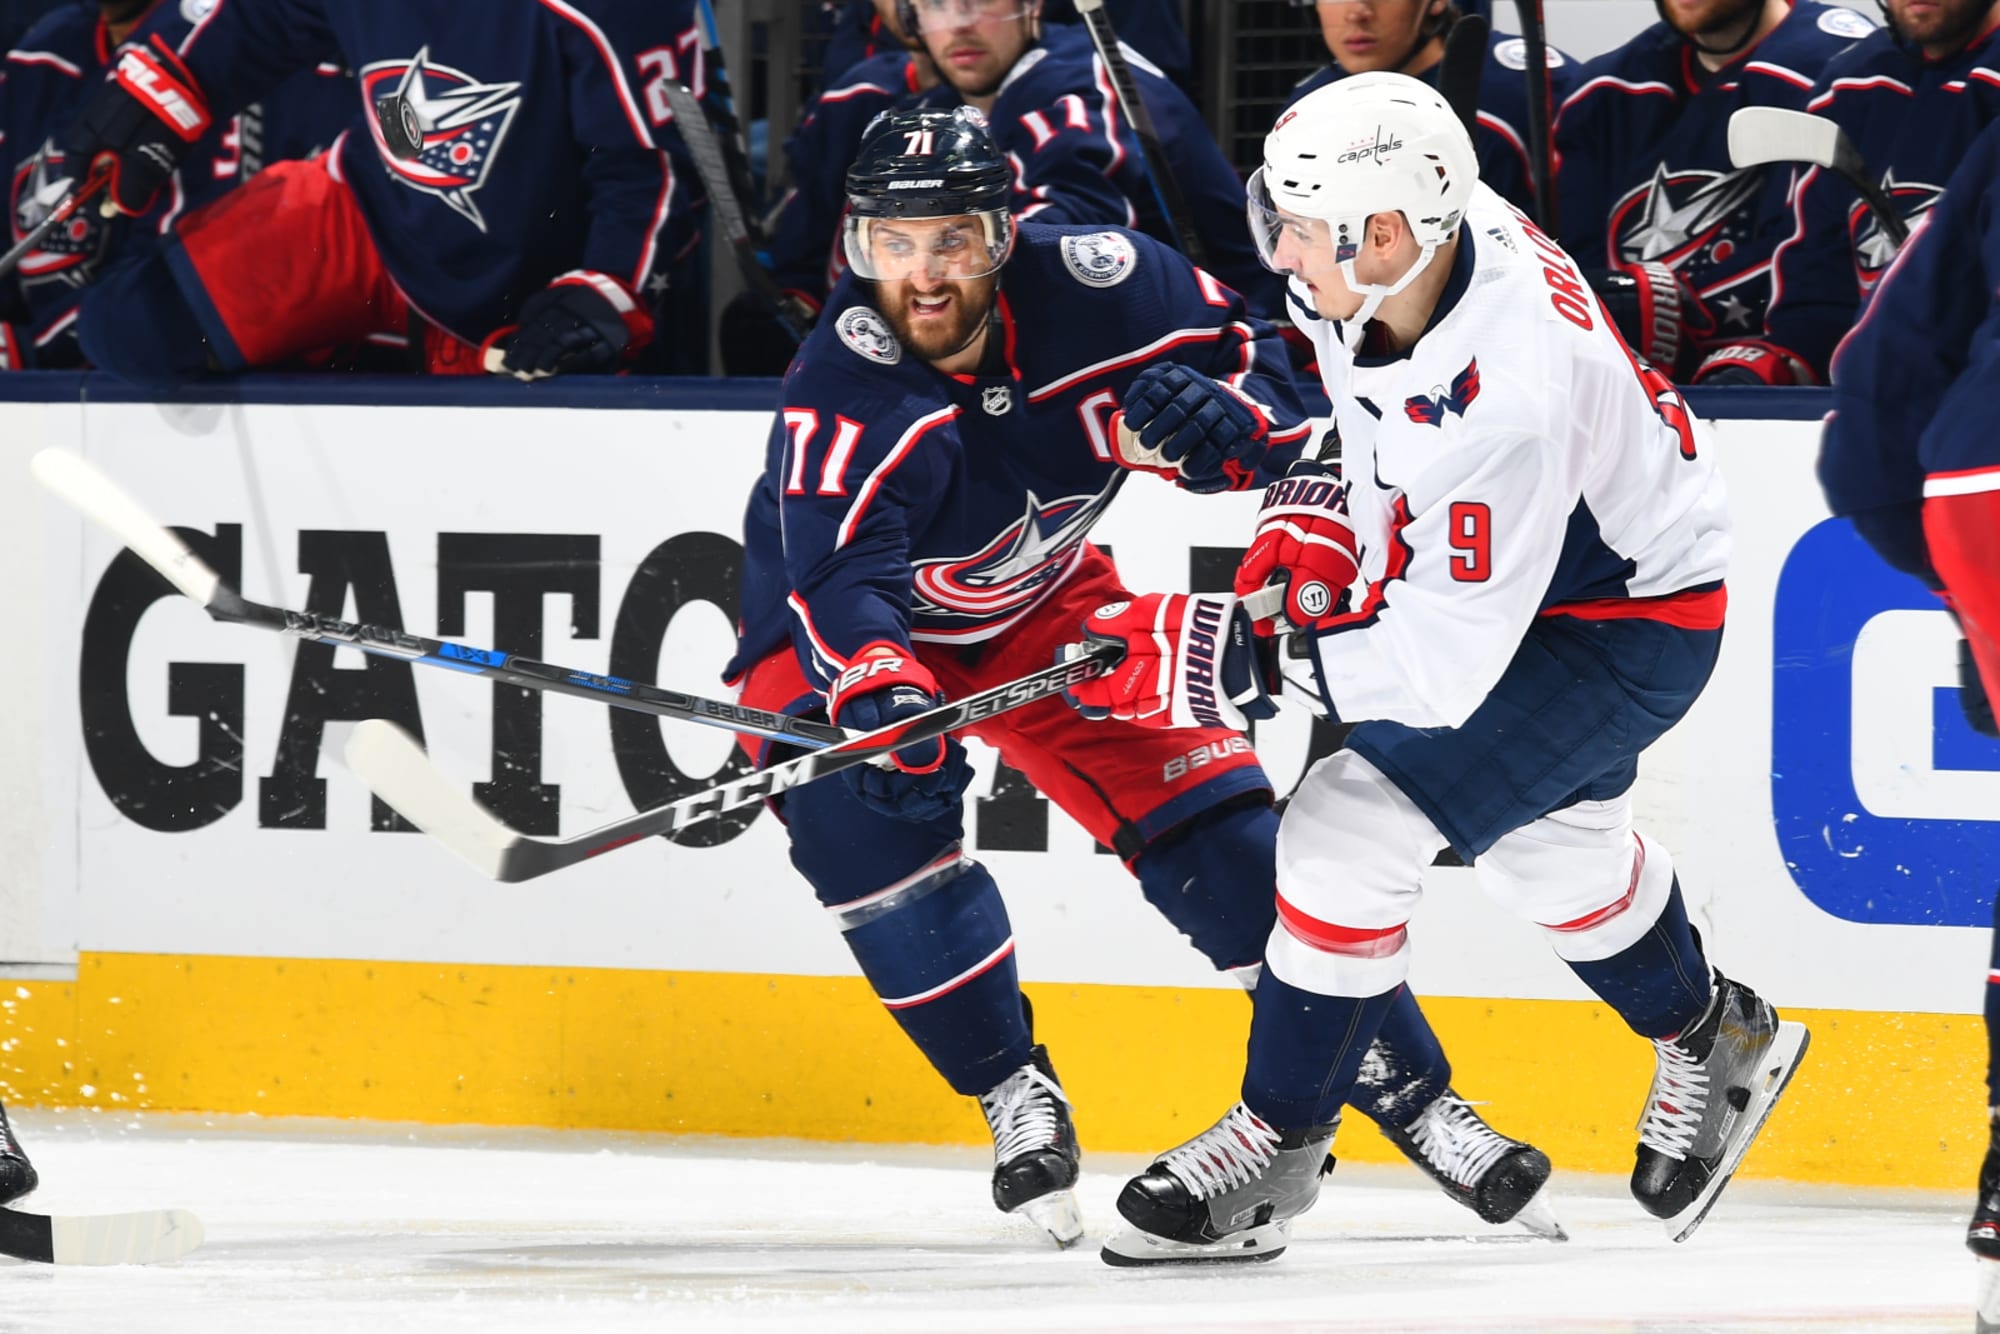 Game Five is a must Win for the Columbus Blue Jackets